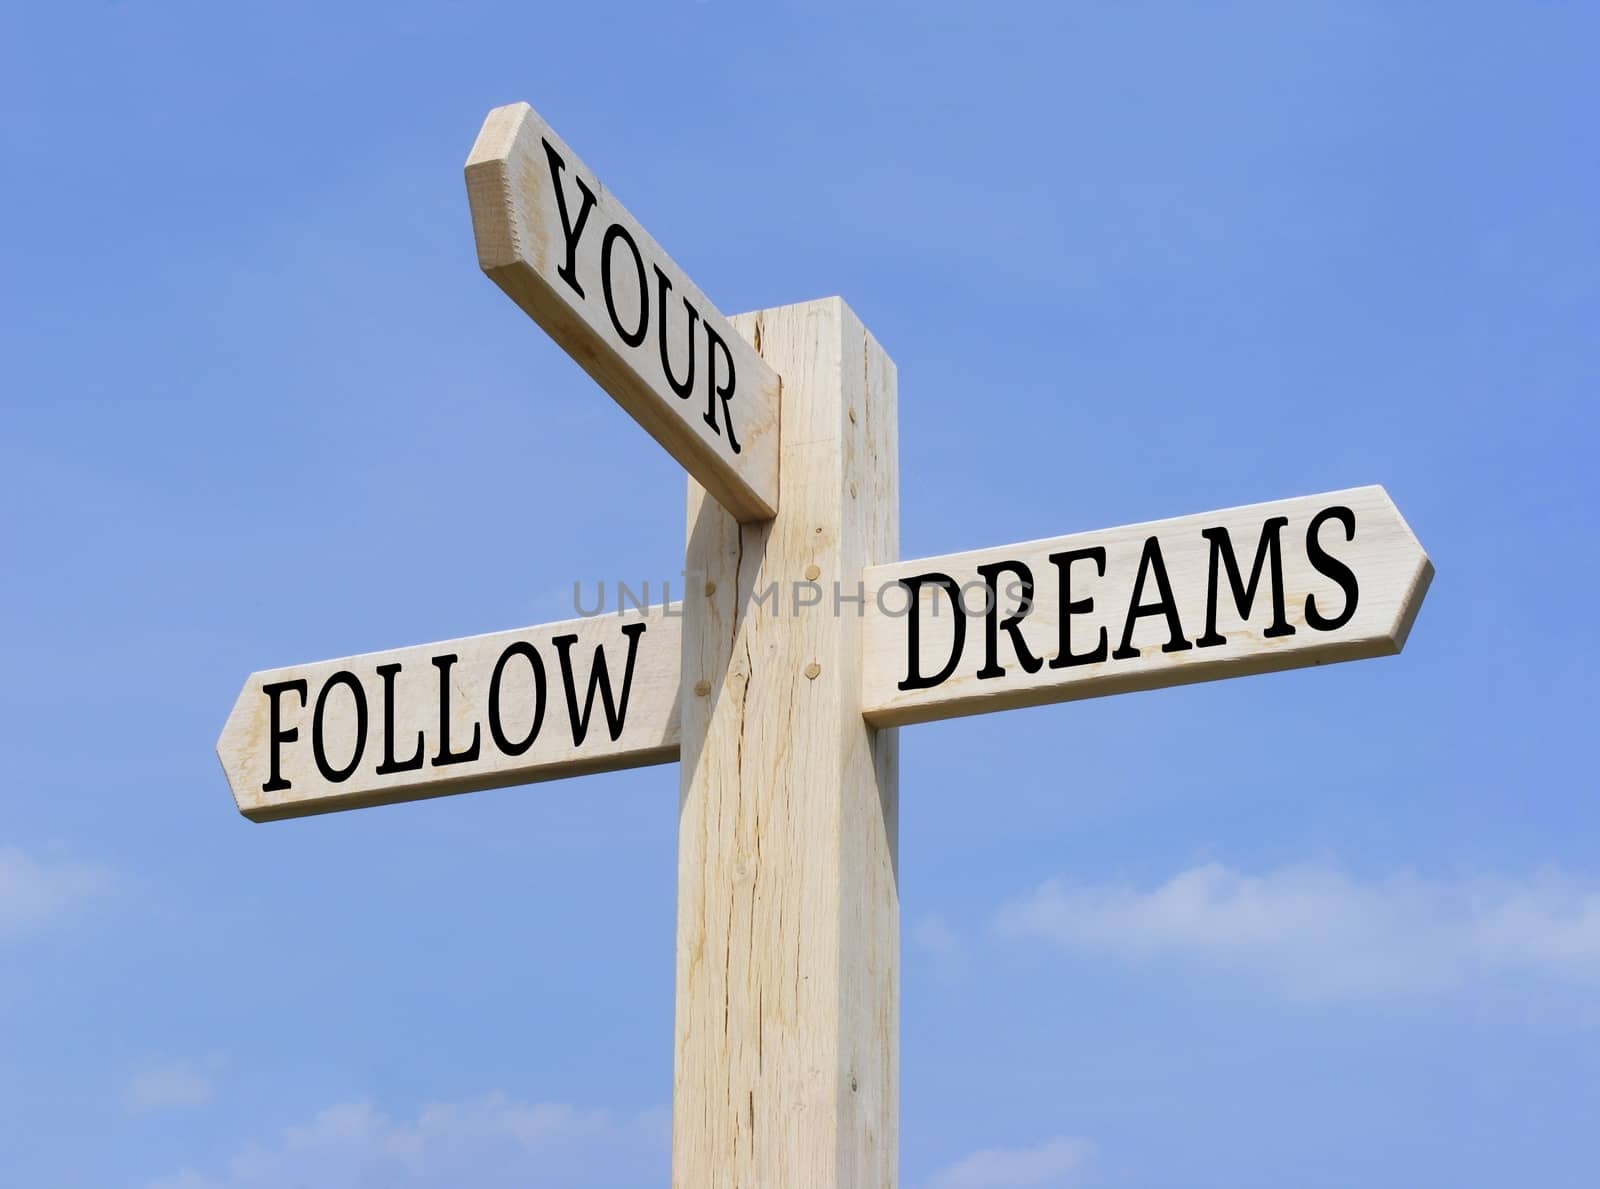 Signpost with the words "Follow Your Dreams" over a blue sky background